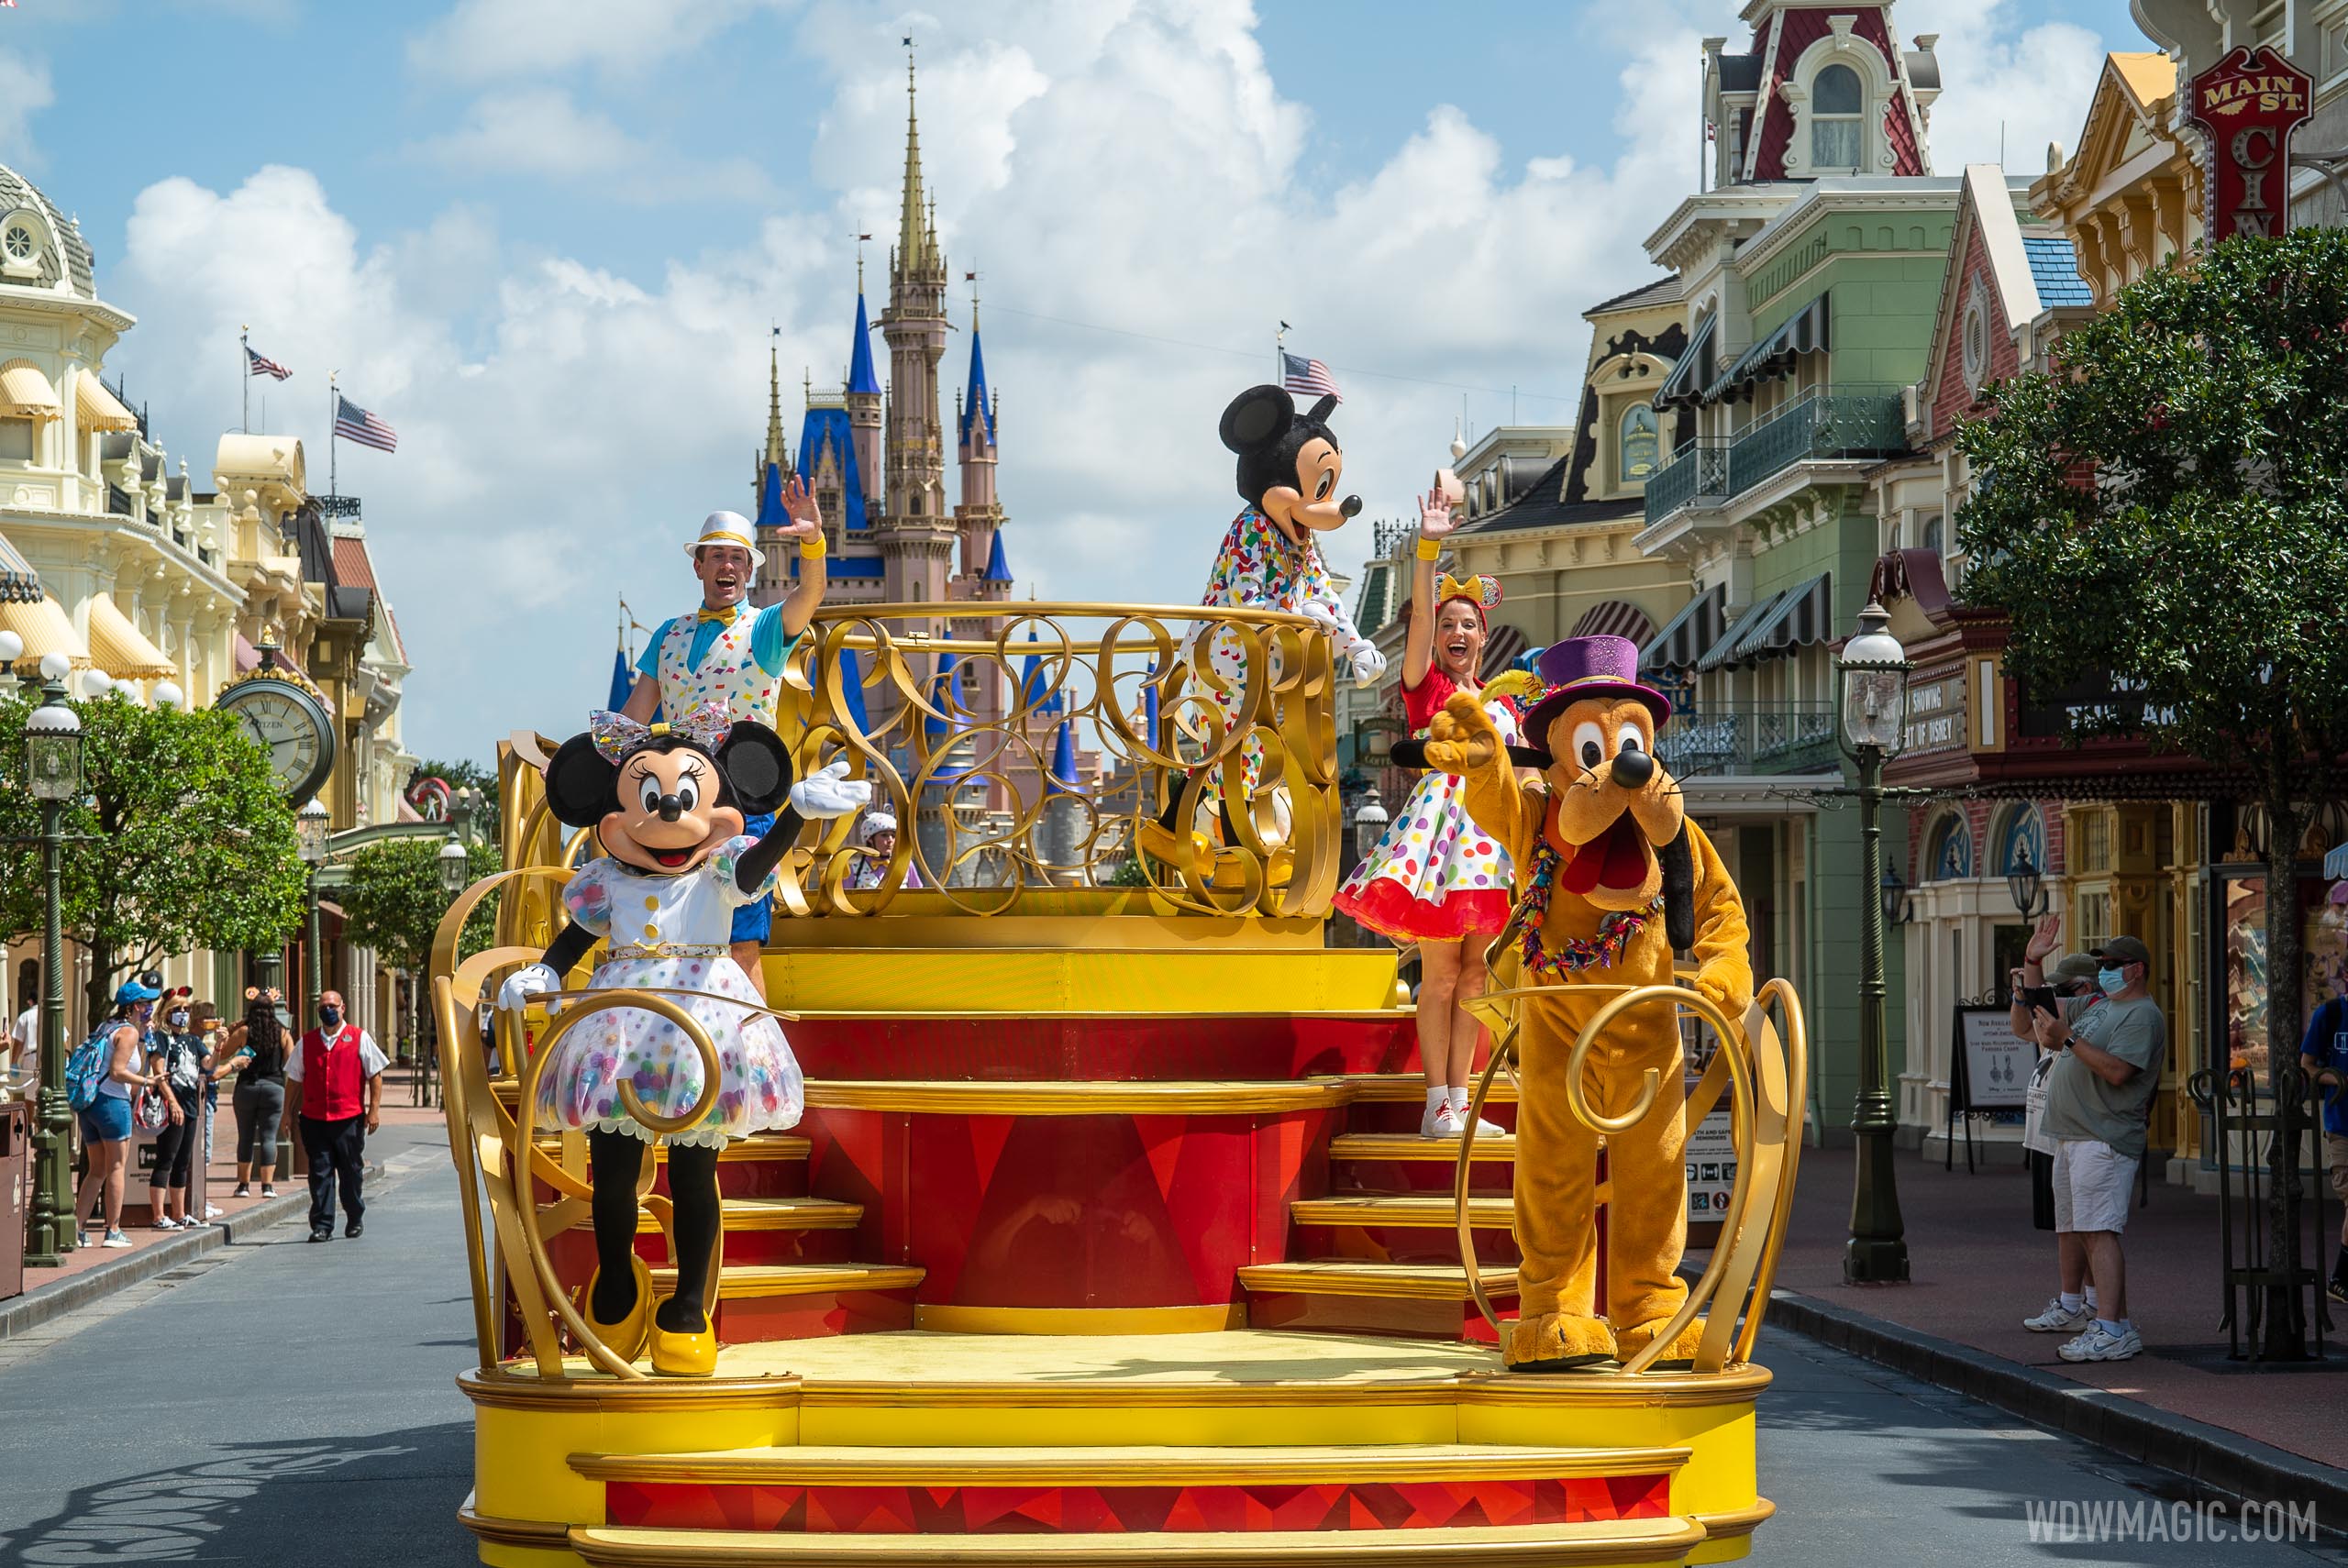 Magic Kingdom entertainment during COVID-19 phased reopening - Photo 4